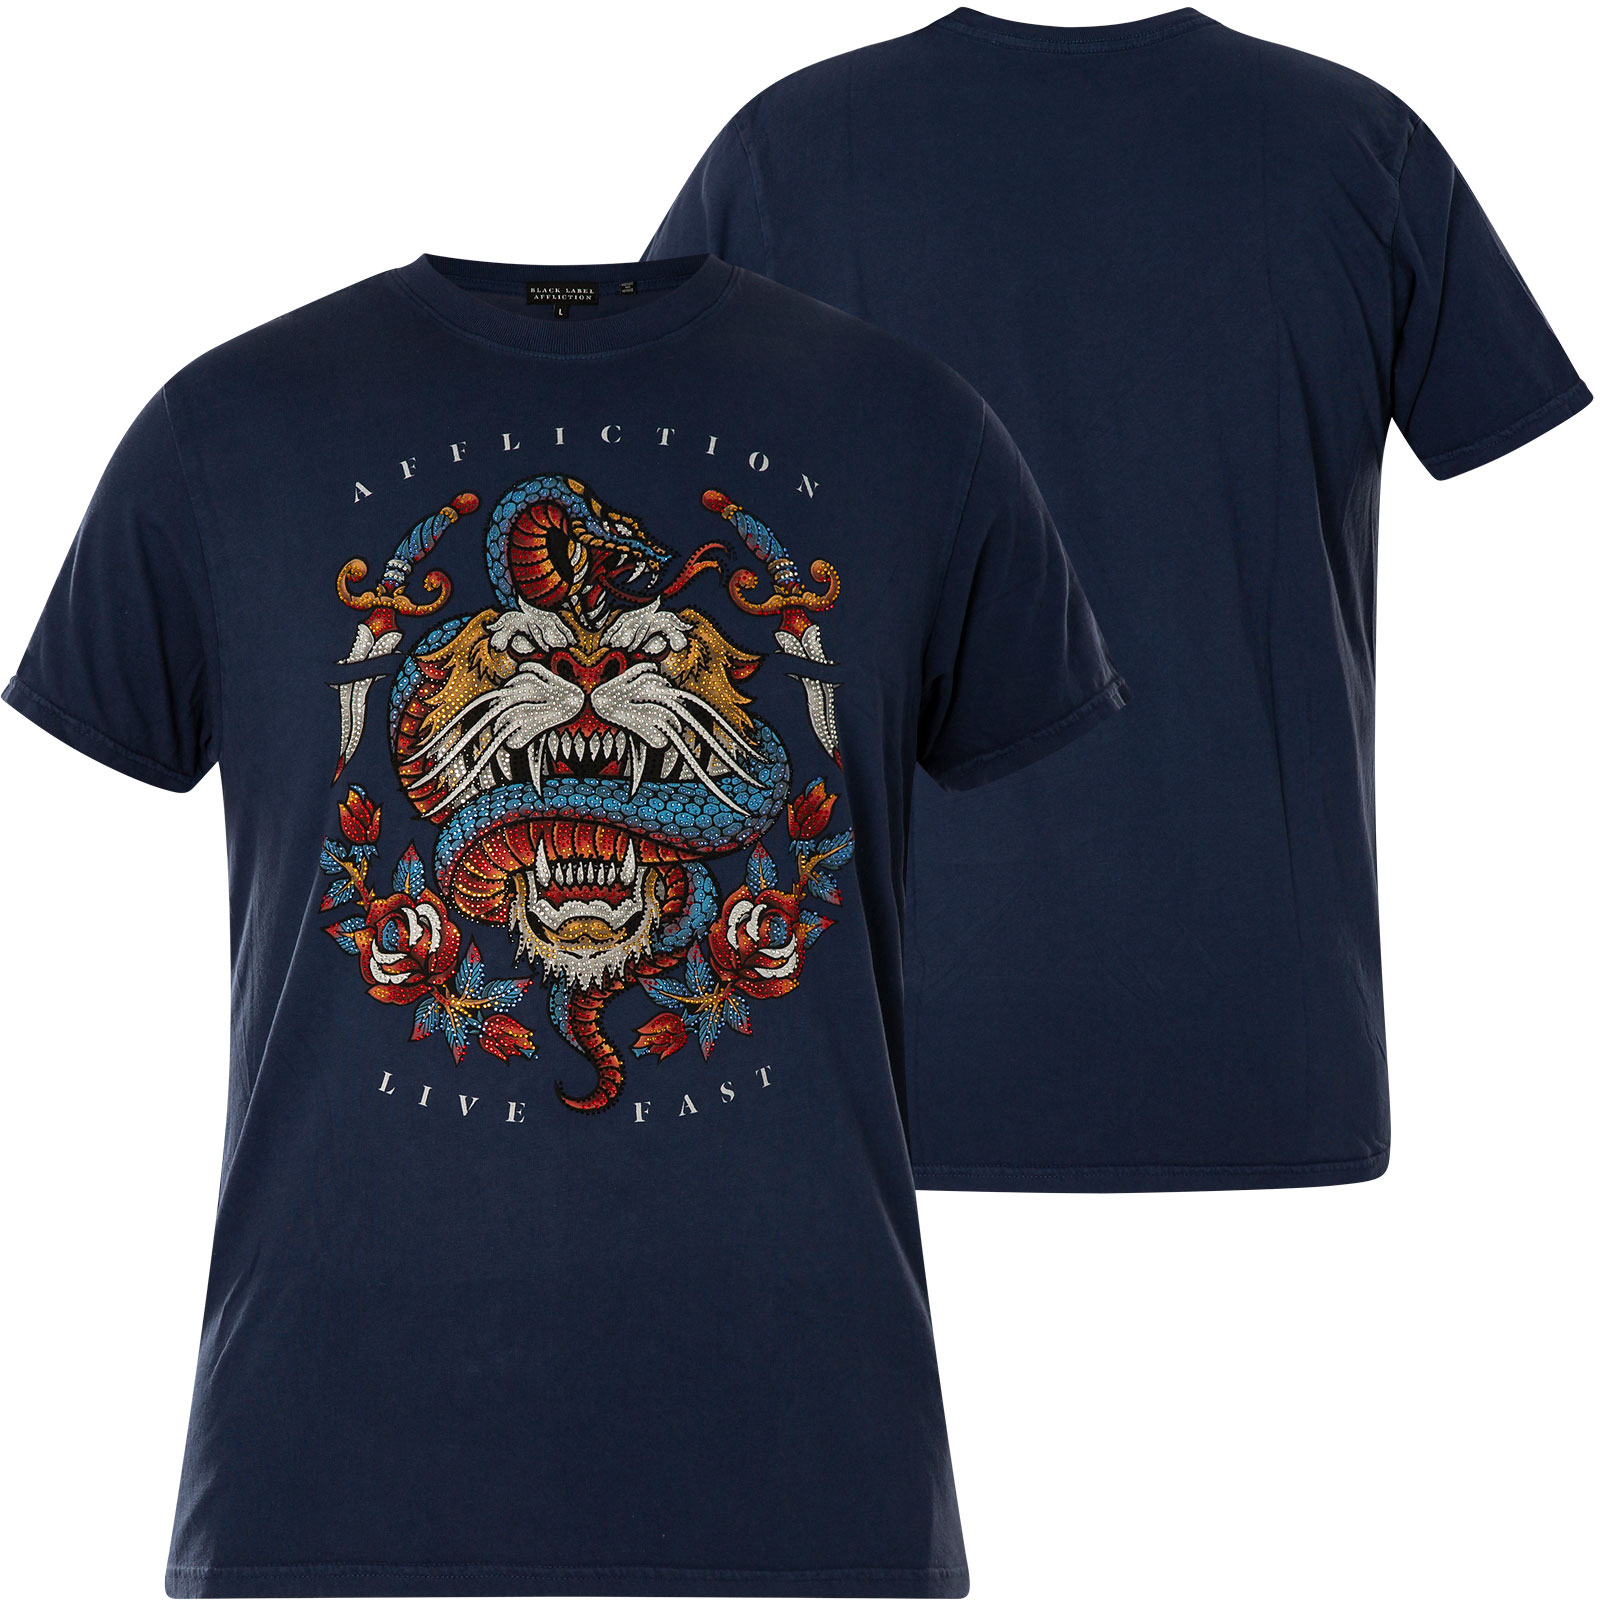 Affliction Brawl City T-Shirt Print with tiger head, snake and flowers